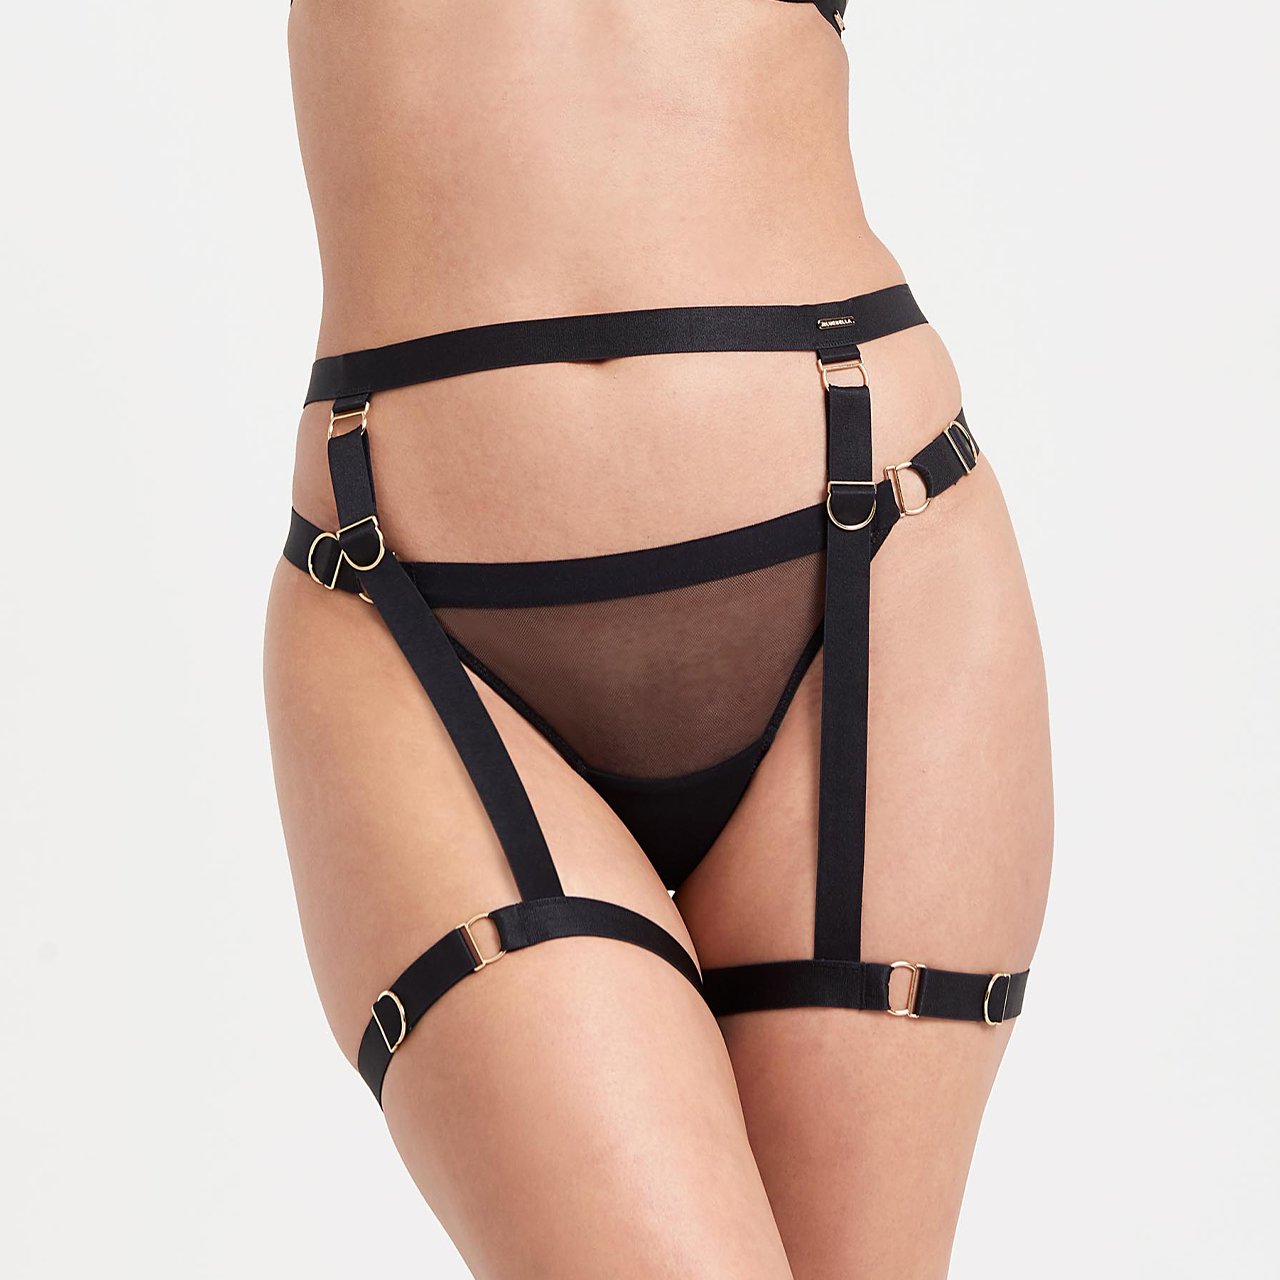 http://fancyup.me/store/image/7536202088468372/thea-thigh-harness-black.jpg